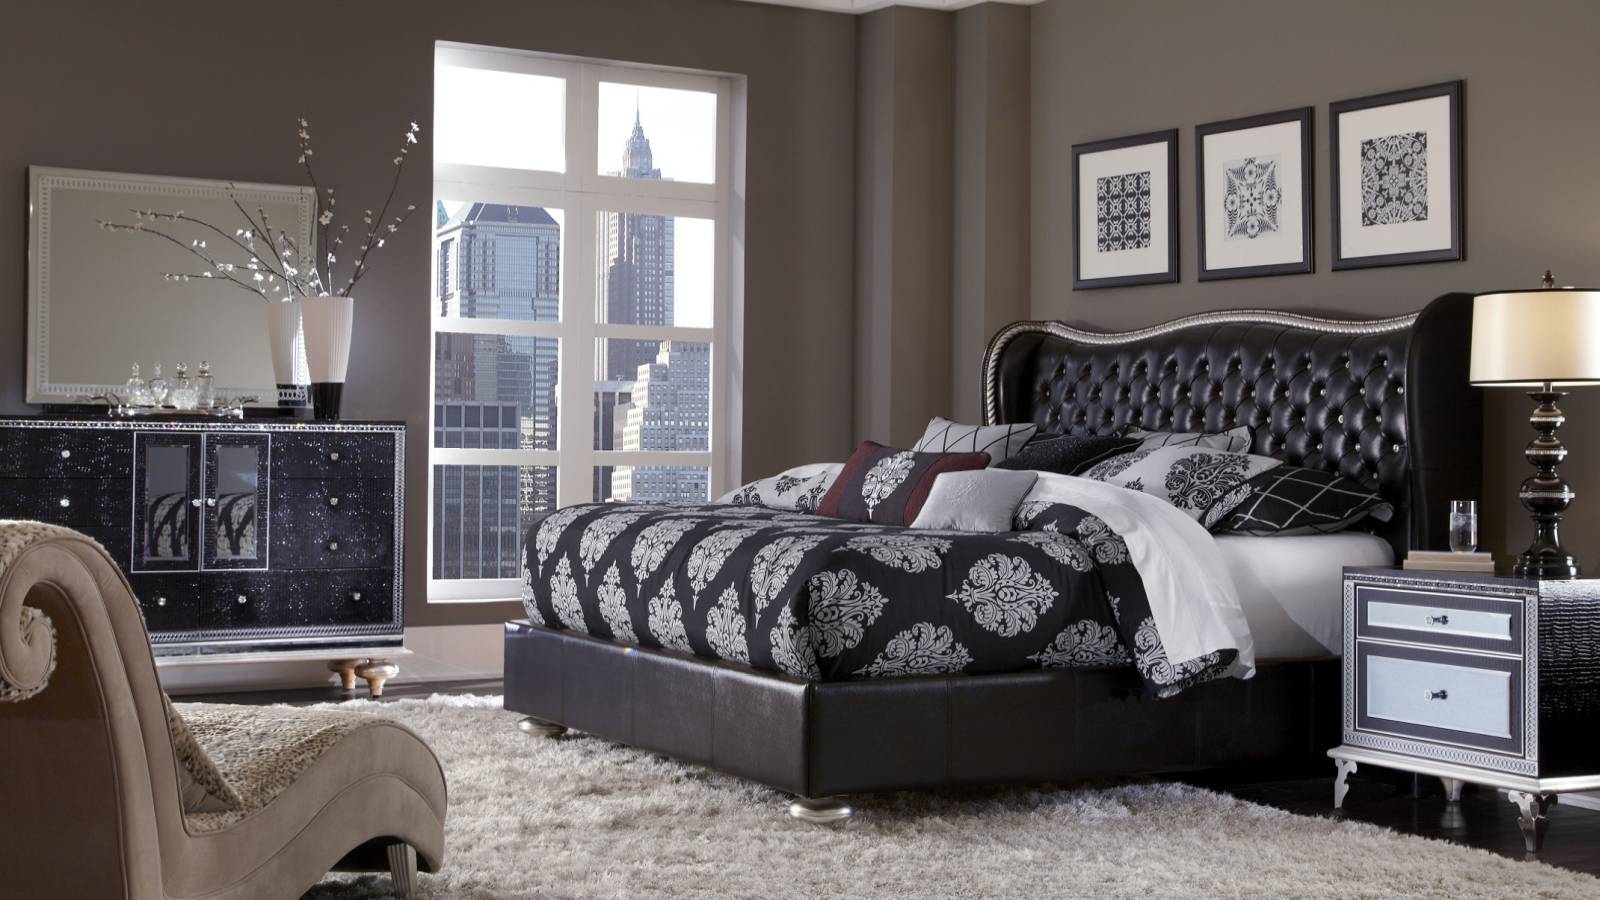 16 Cute Bedroom Ideas In 4 Different Styles